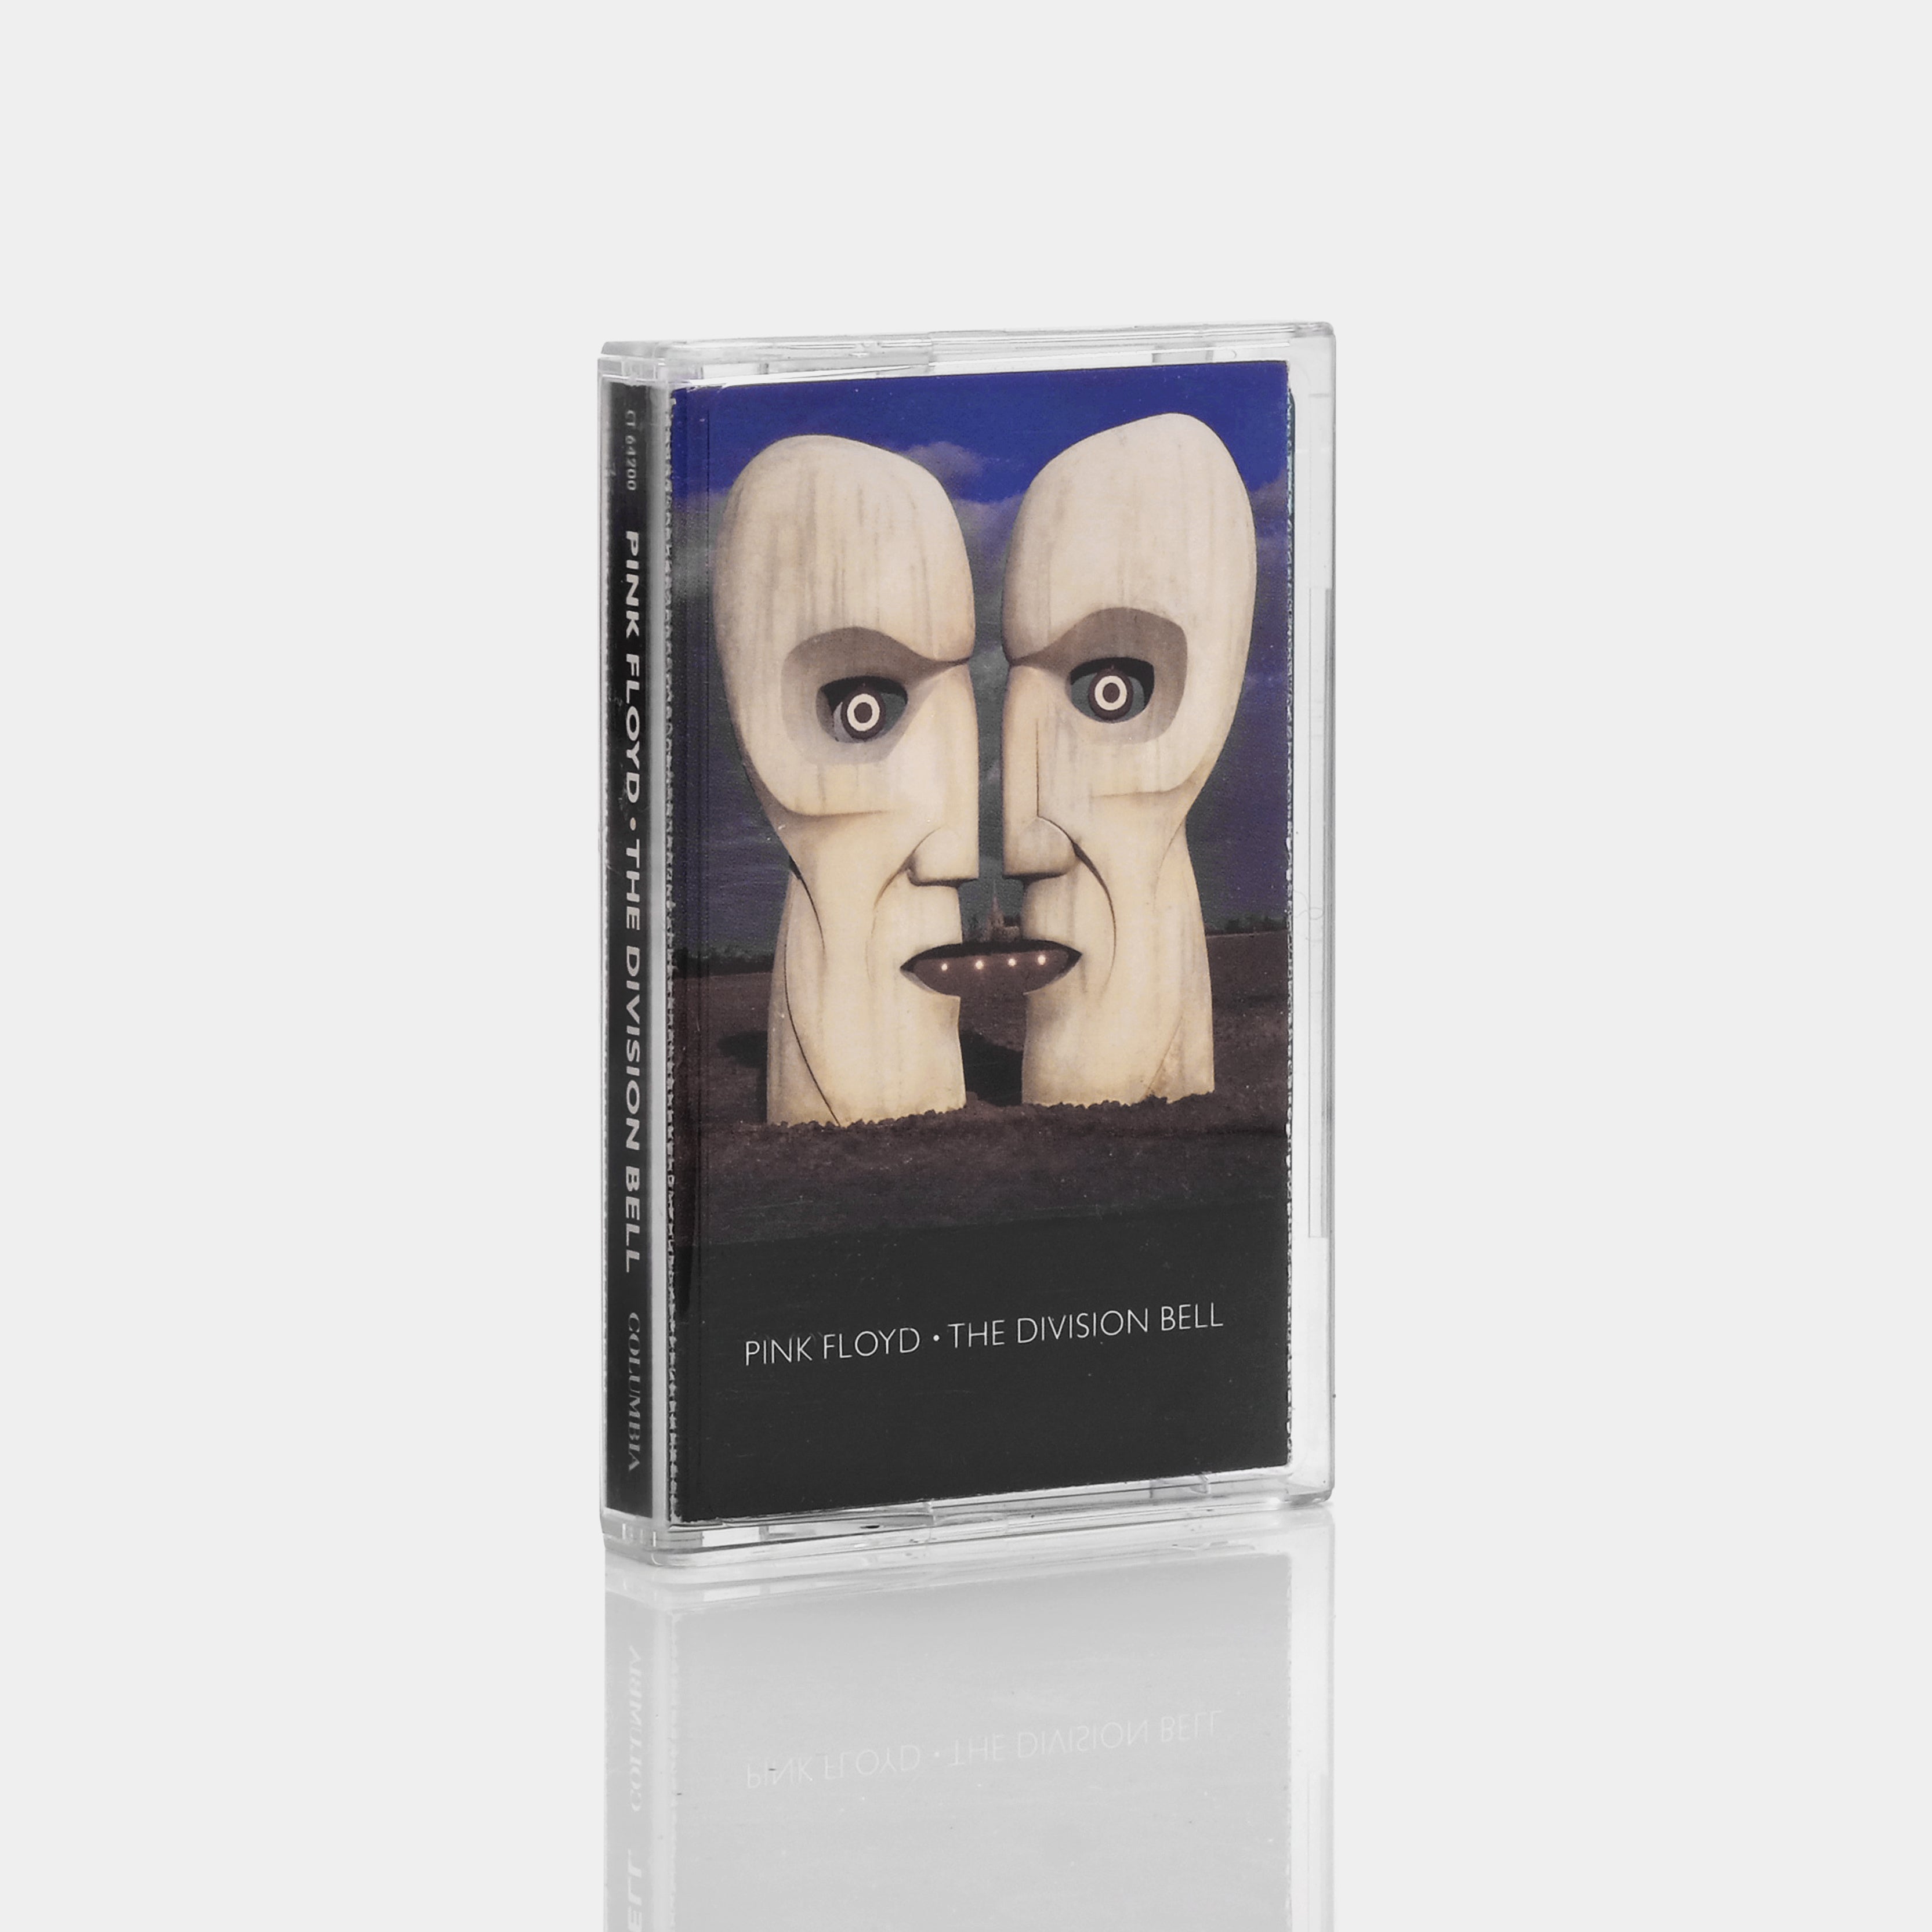 Pink Floyd - The Division Bell Cassette Tape